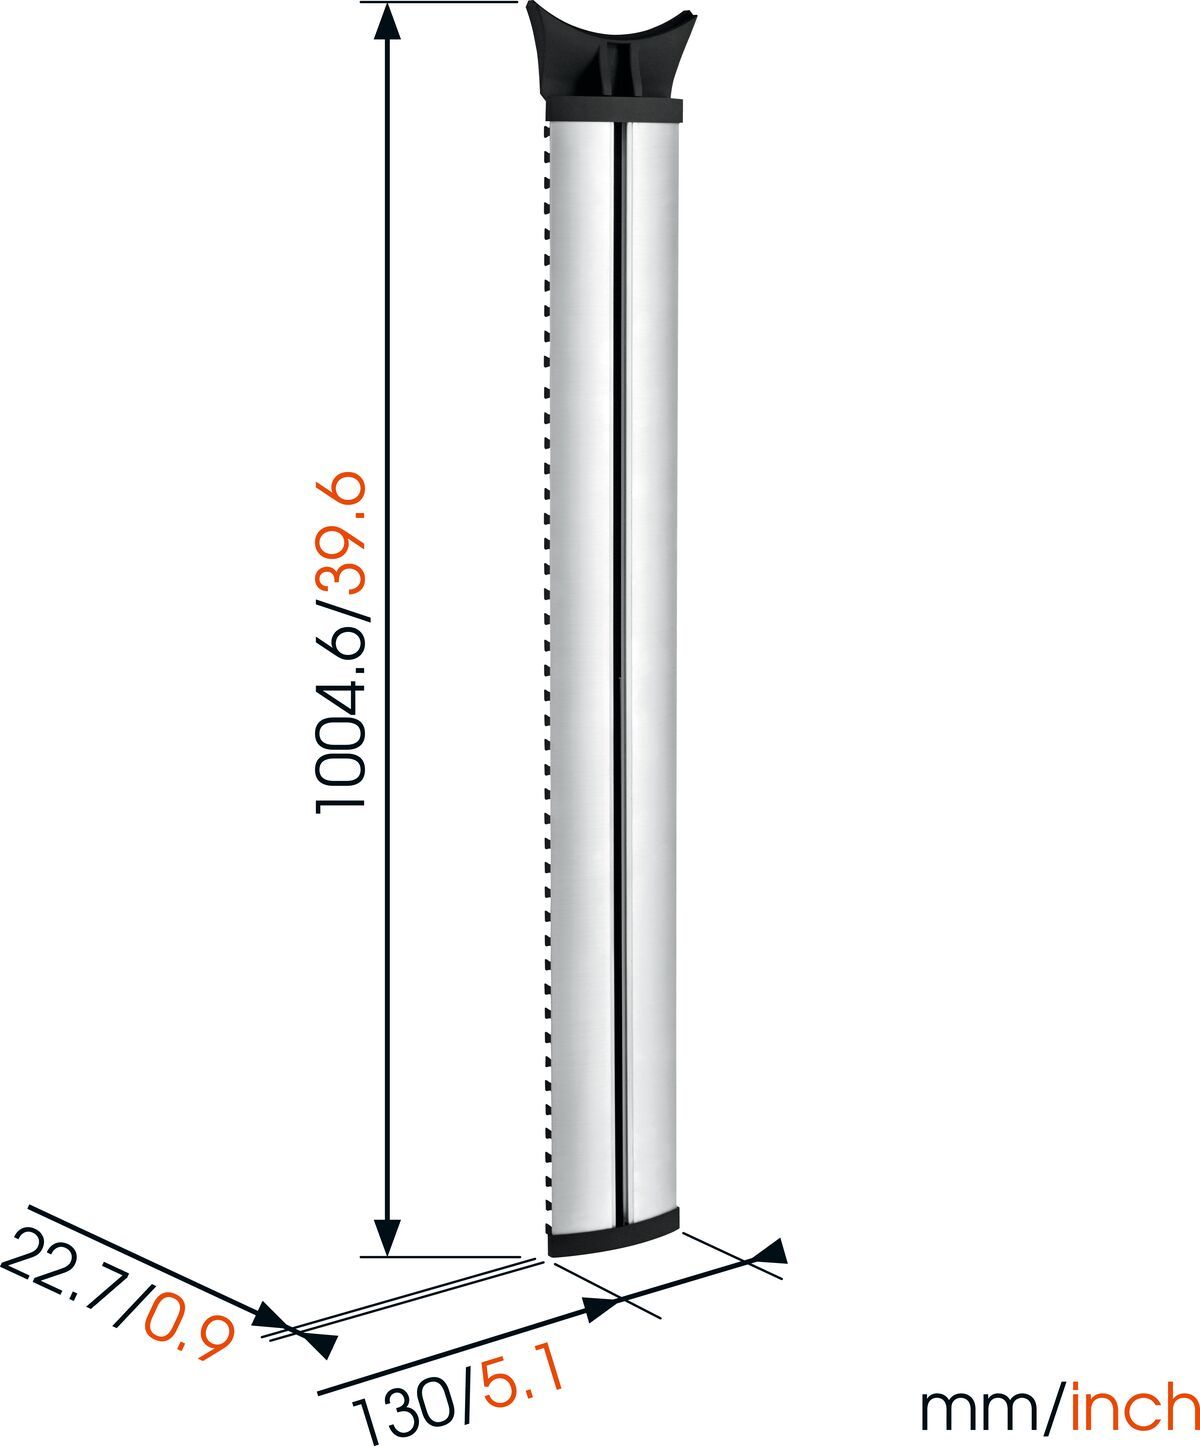 Vogel's NEXT 7840 Cable Column - Max. number of cables to hold: Up to 10 cables - Length: Dimensions